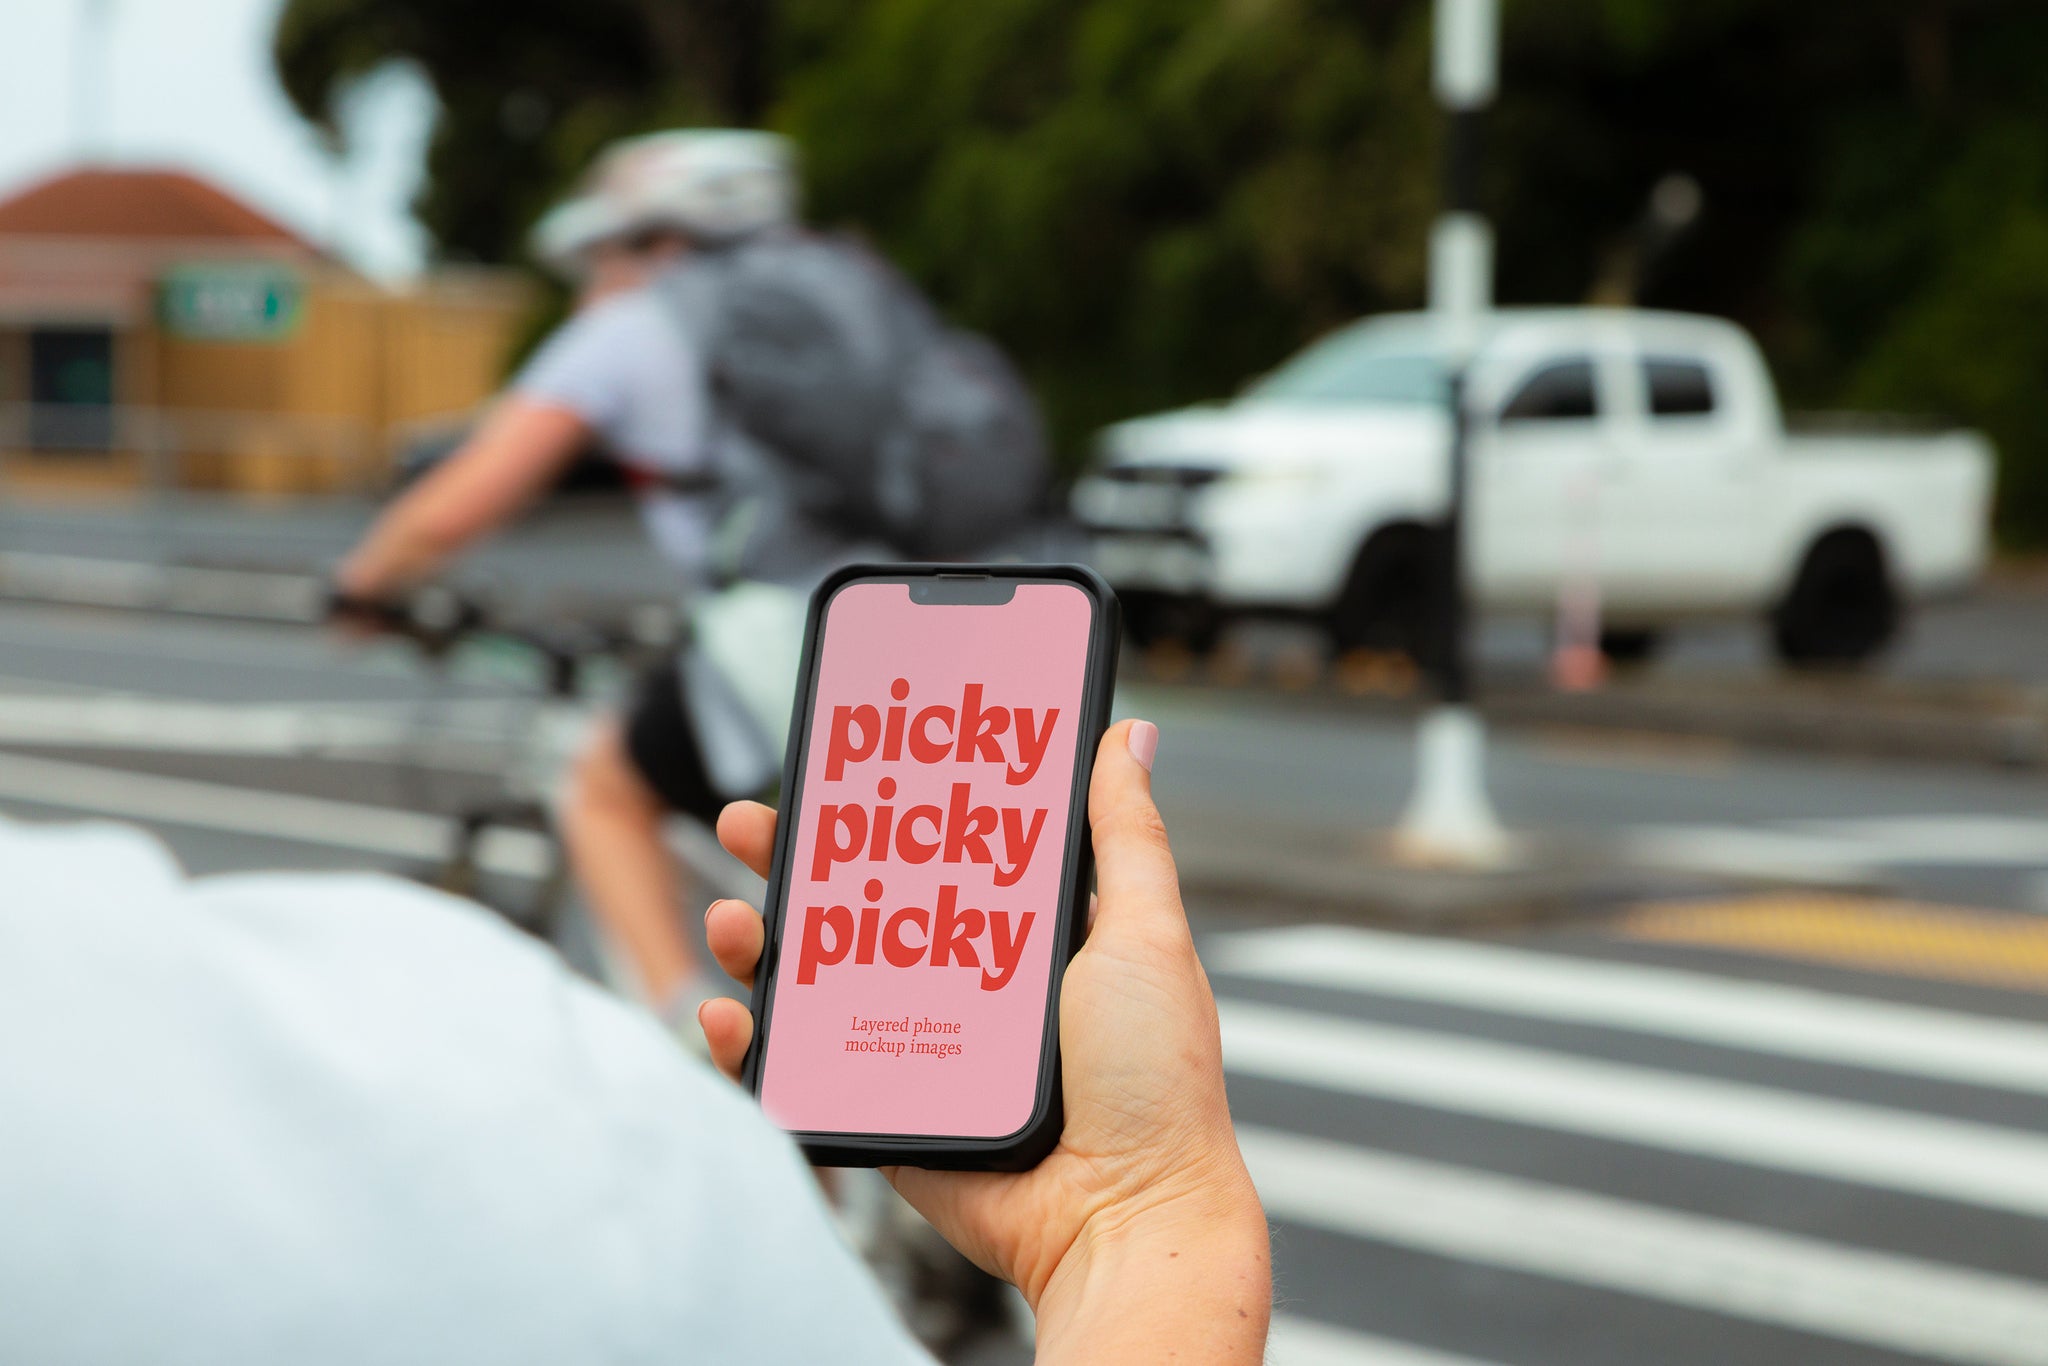 Over shoulder shot of lady holding a smart phone at a pedestrian crossing. Man on bike with backpack in background. Screen facing camera. Bright pink screen with the words 'picky' written three times in red down the phone screen. 